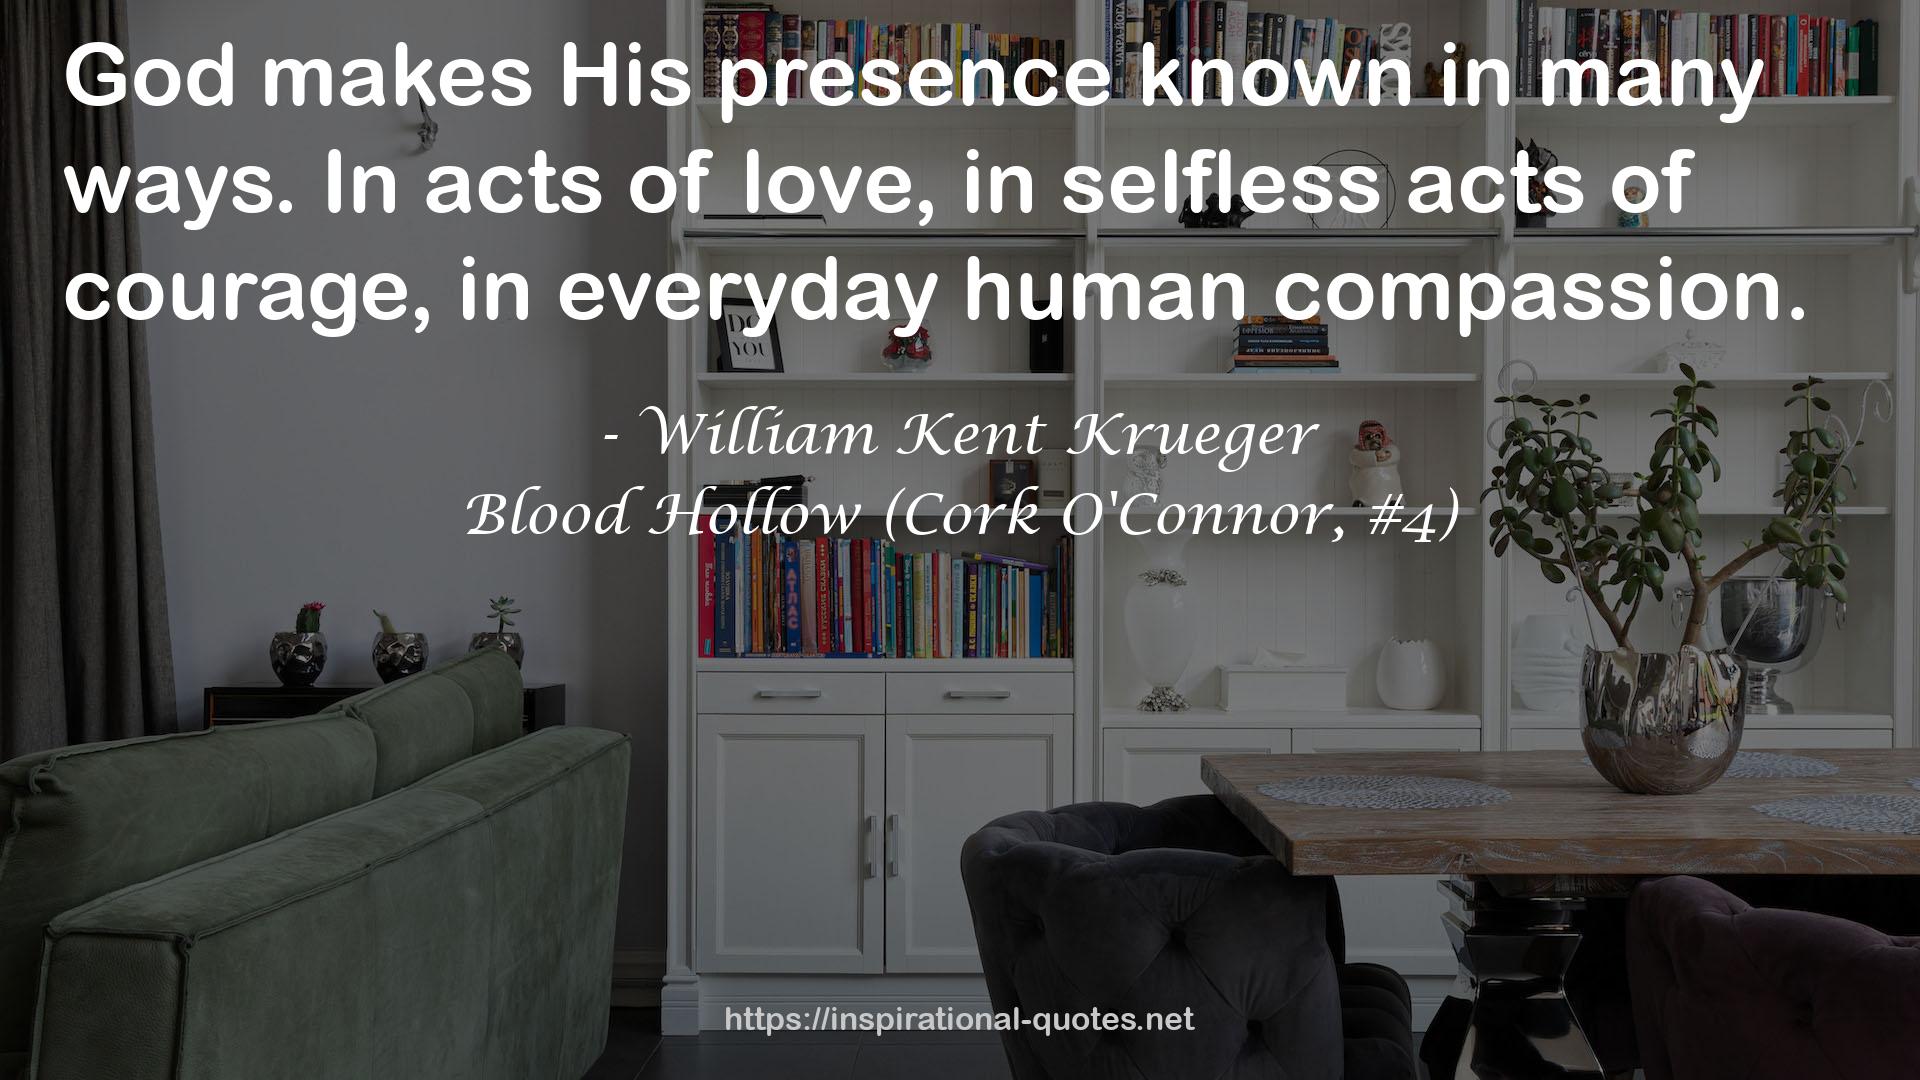 Blood Hollow (Cork O'Connor, #4) QUOTES